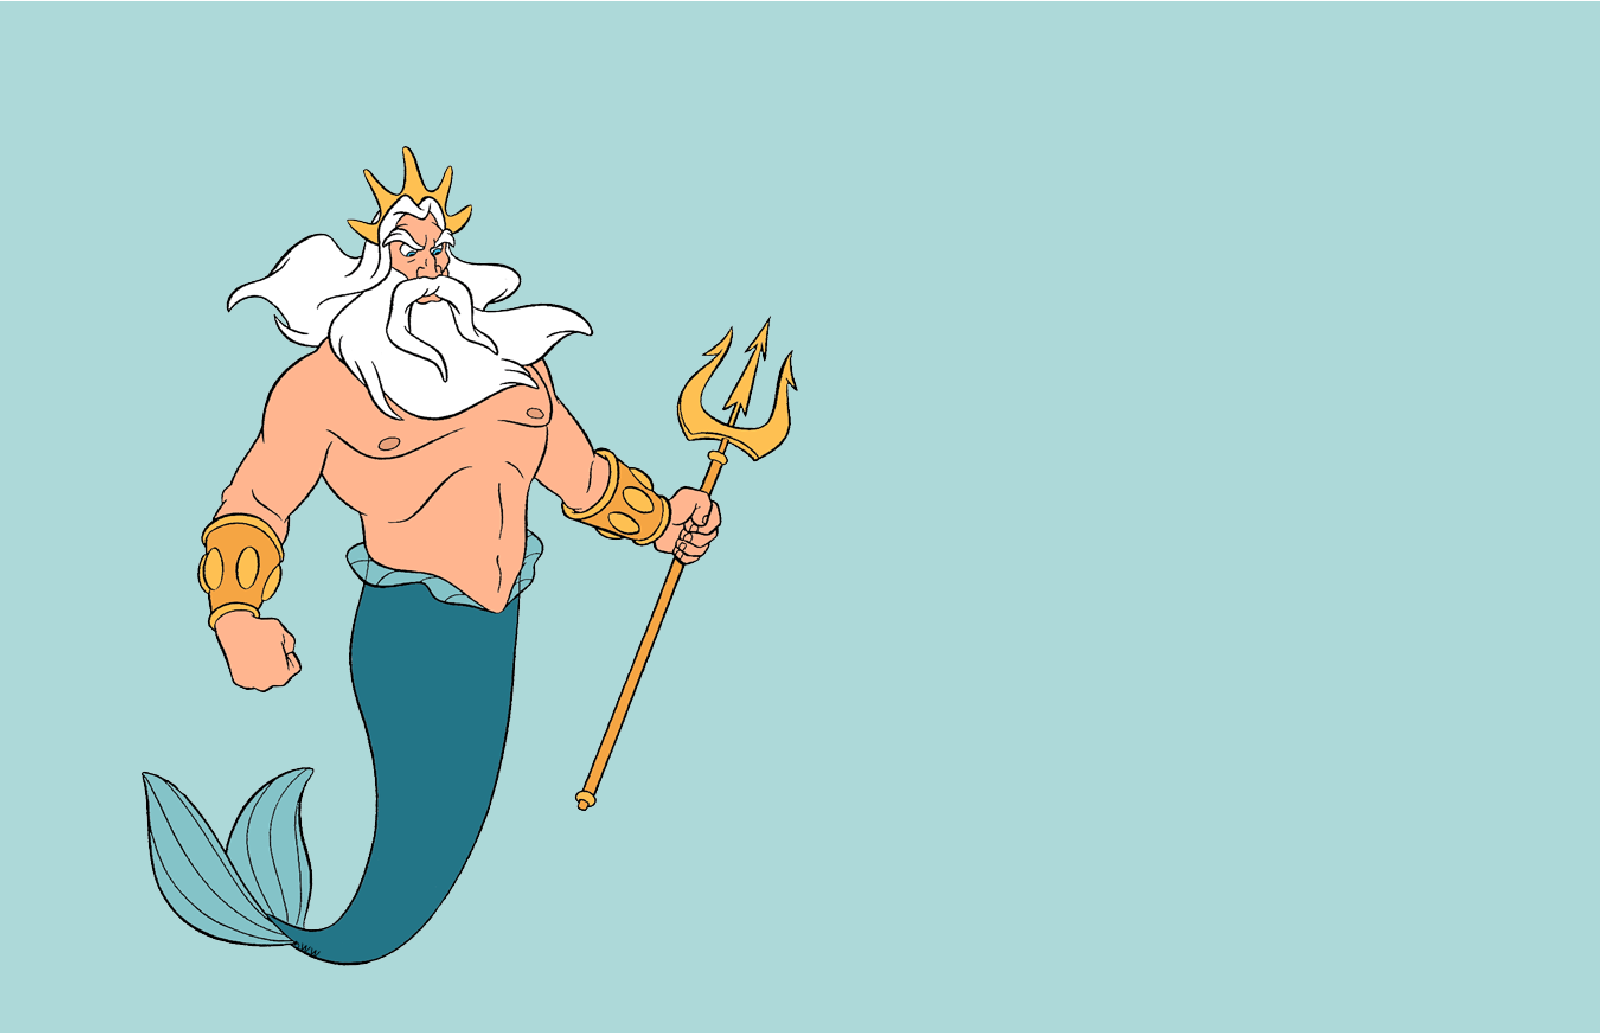 King Triton Hot But Not A Fox Ruth Crilly